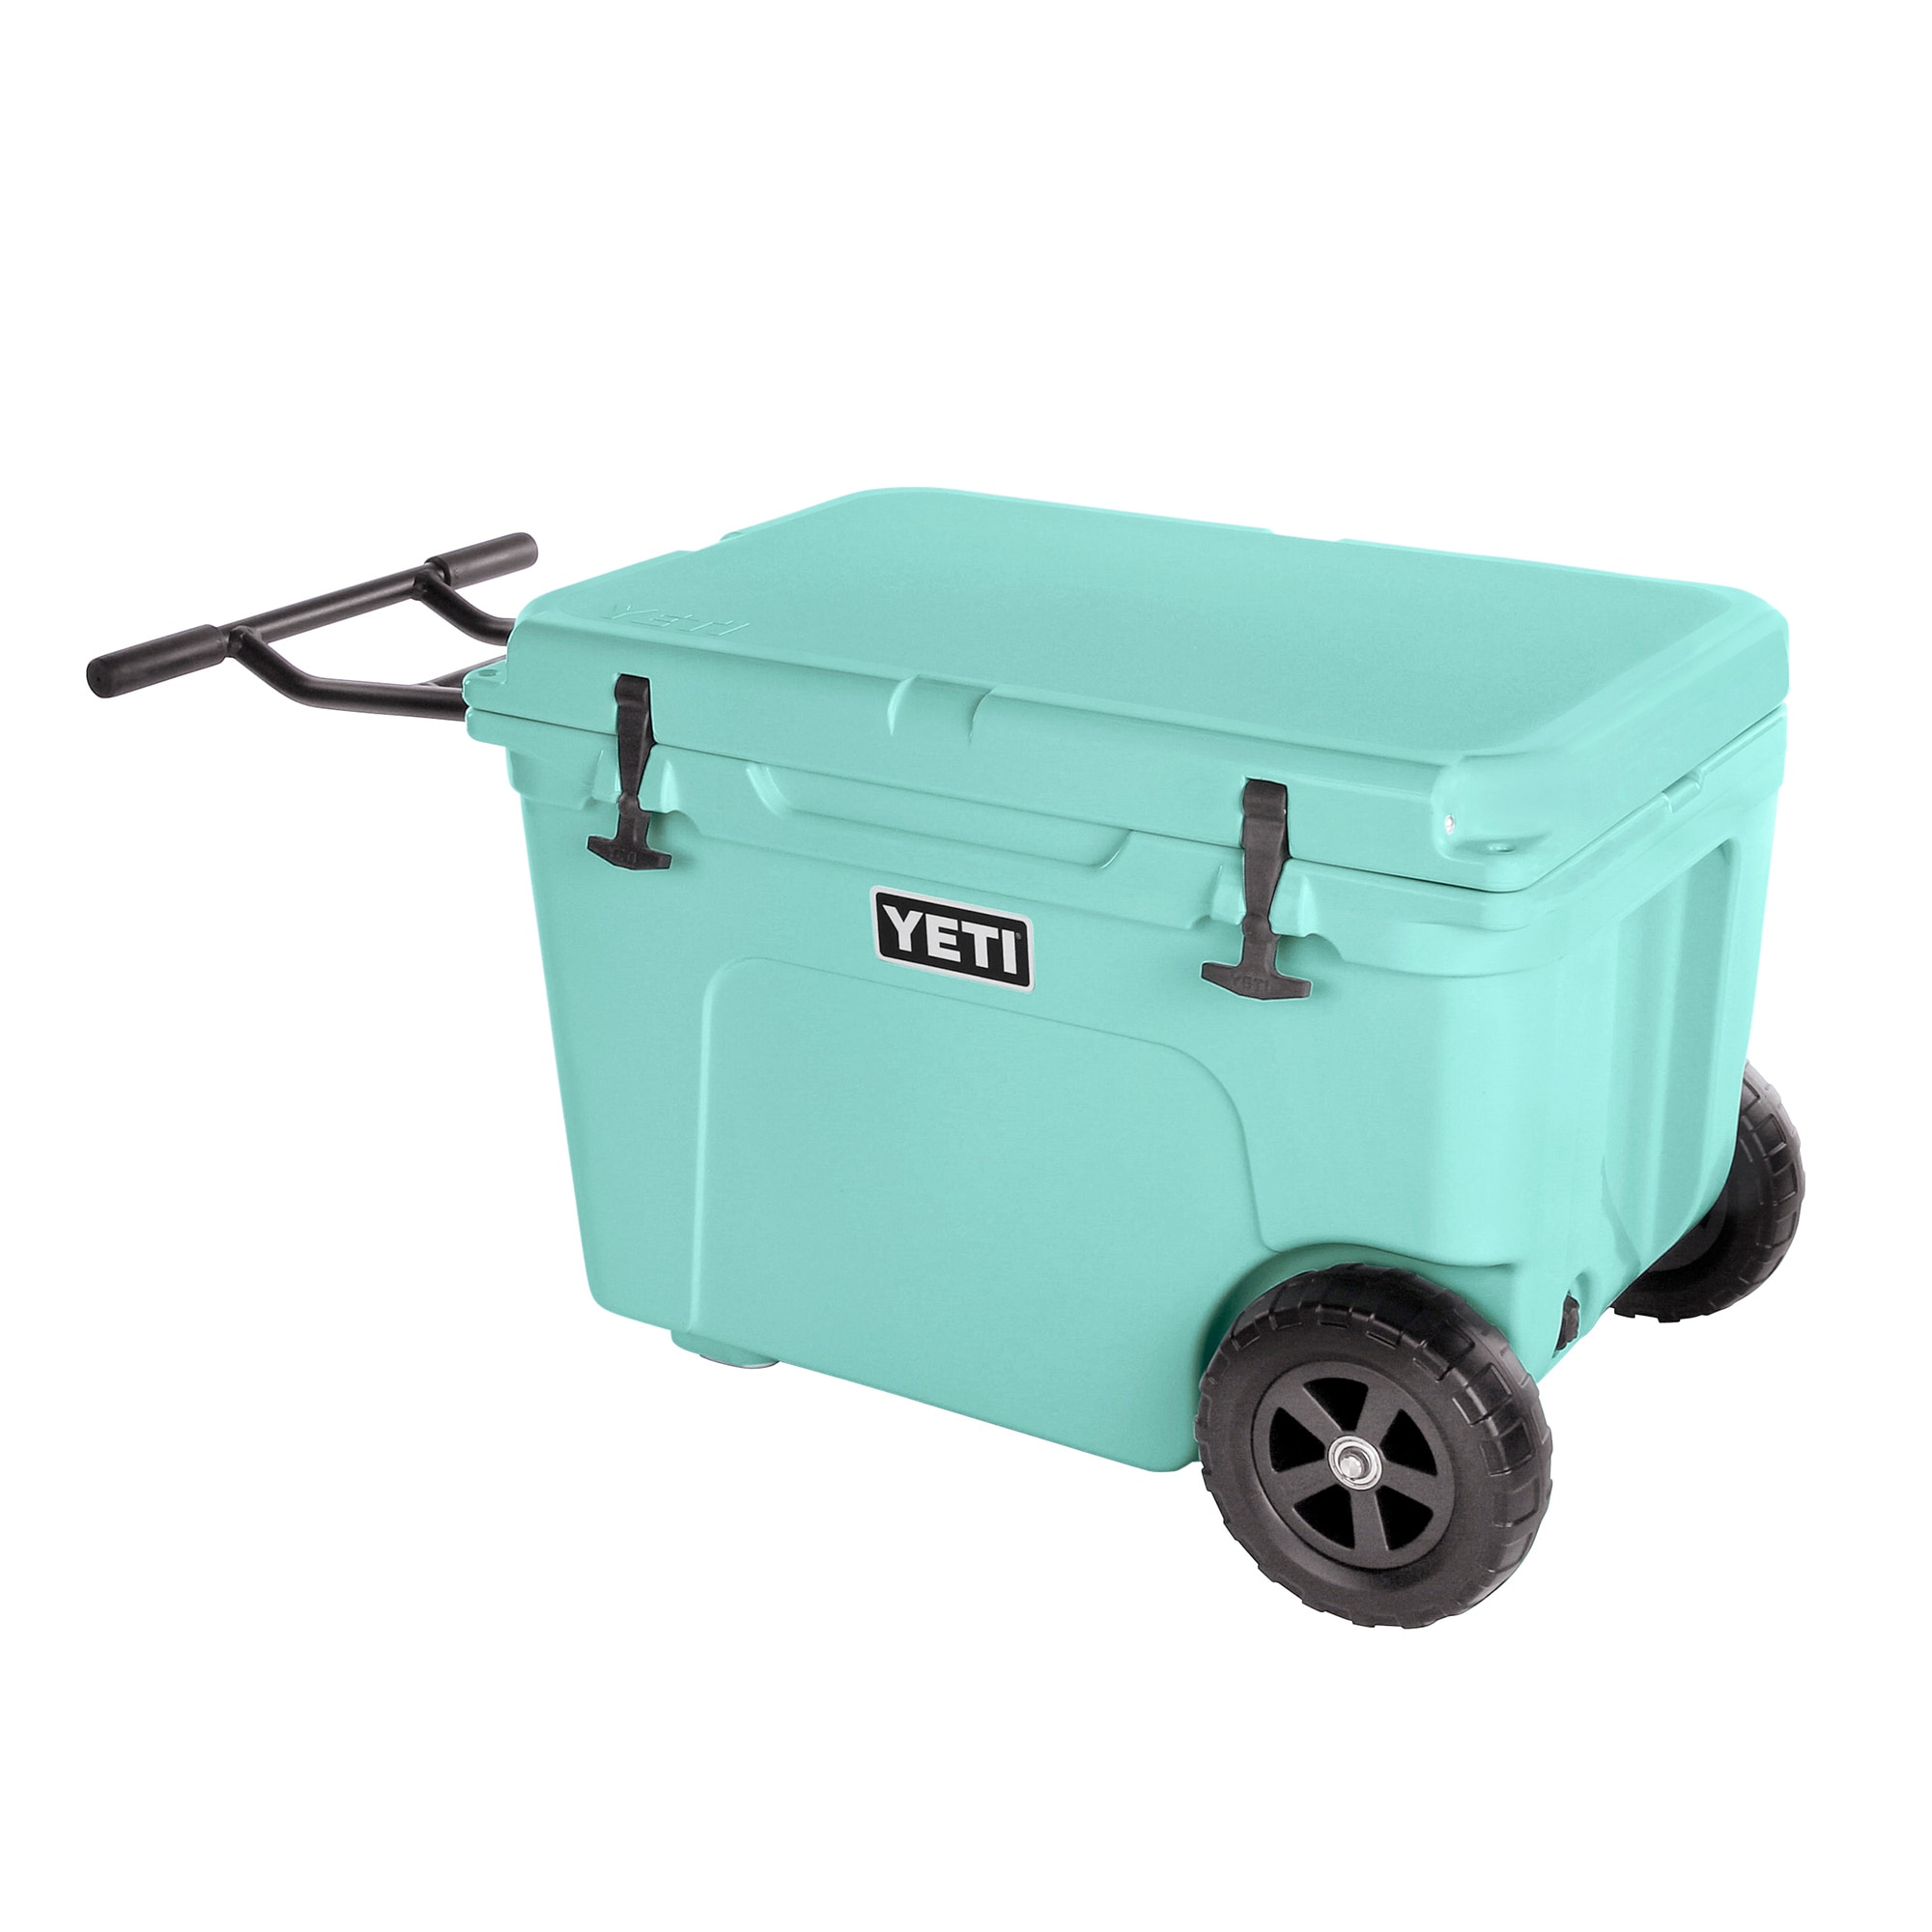 buckledwheel.ie on X: New Yeti coolers in stunning Alpine Yellow just  landed with us.. We are open Friday, Saturday, Sunday and Monday this  weekend  / X